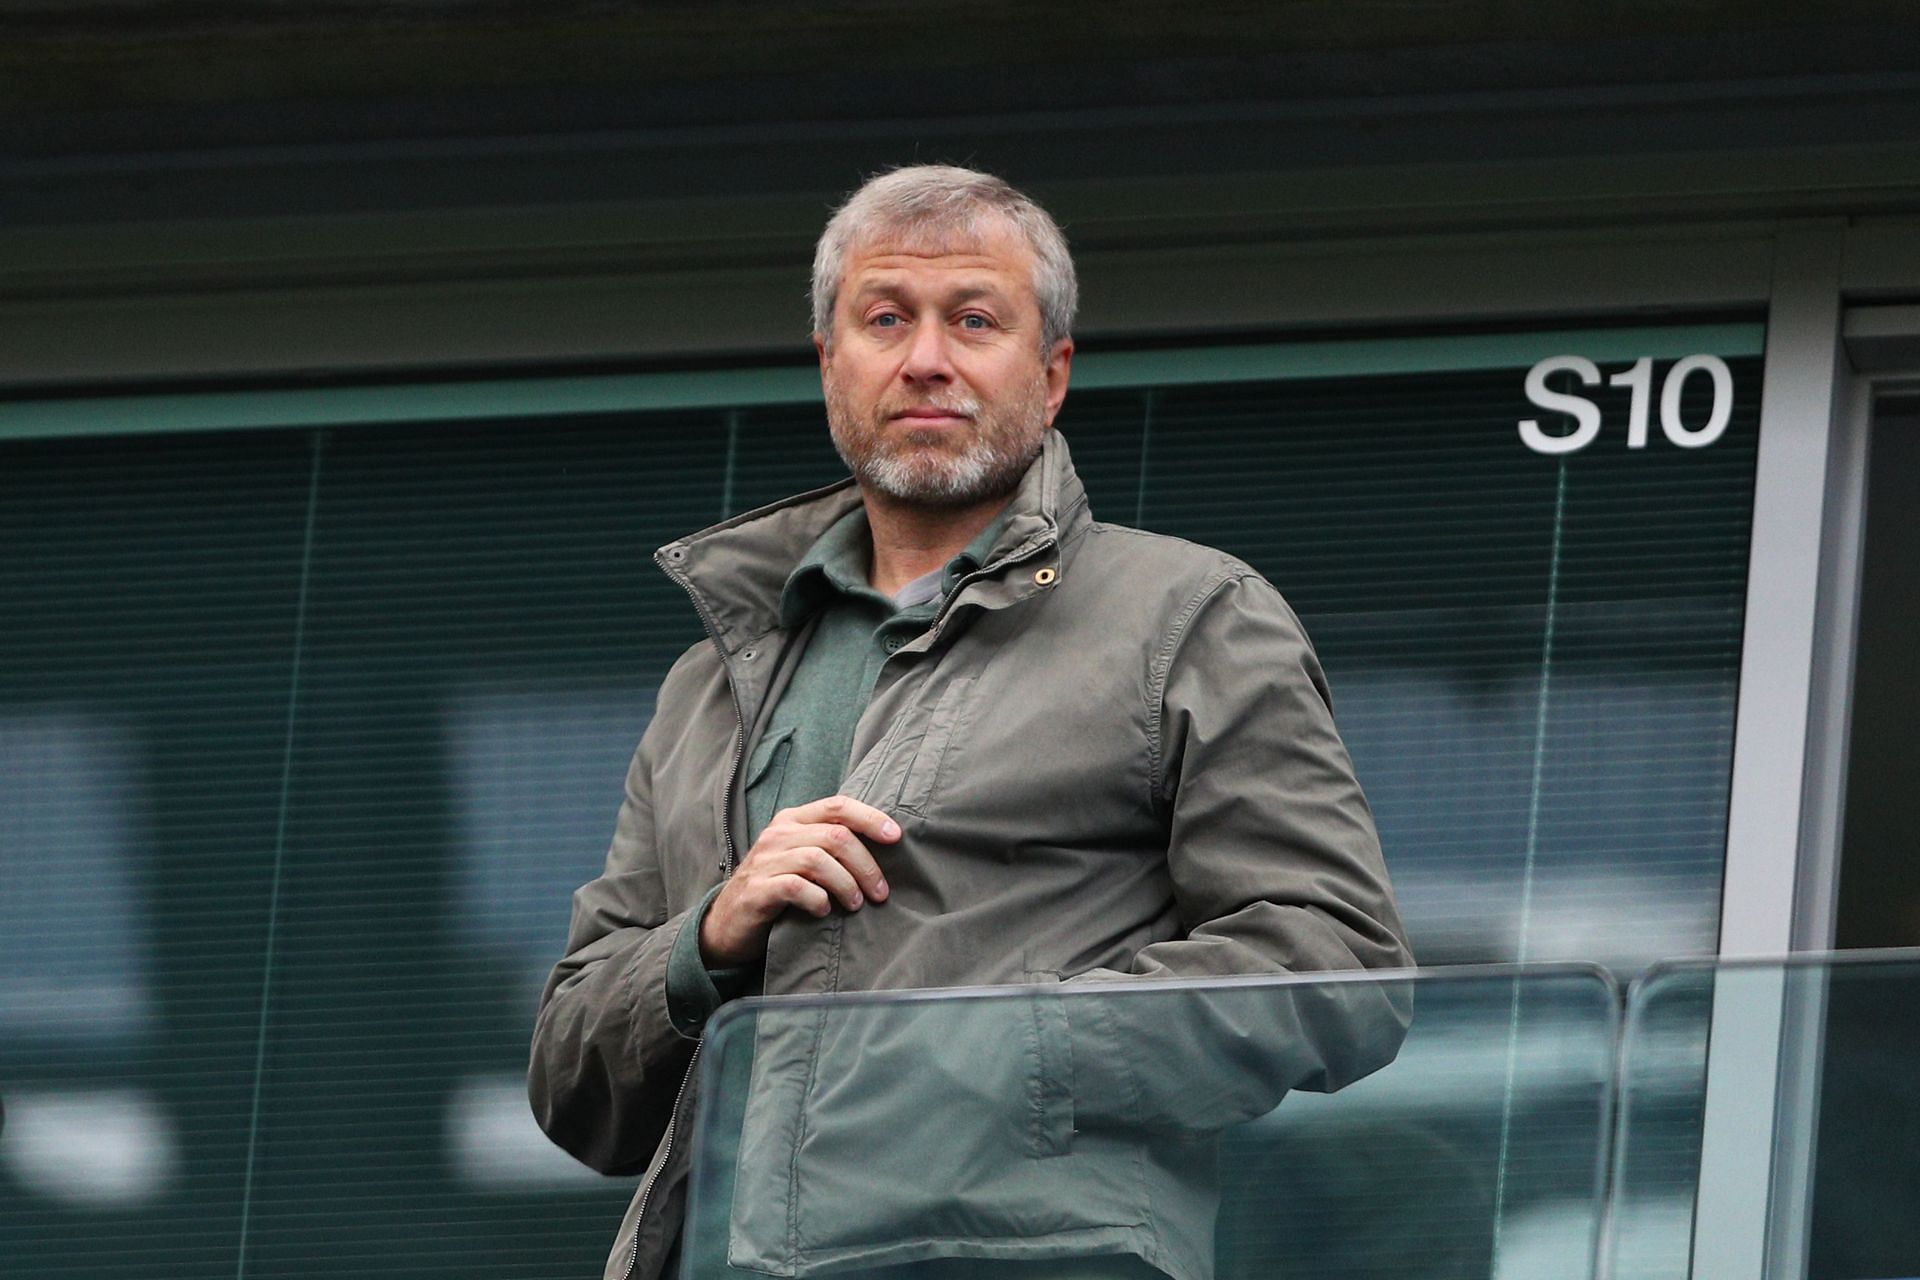 Chelsea owner Roman Abramovich looks on during a game.